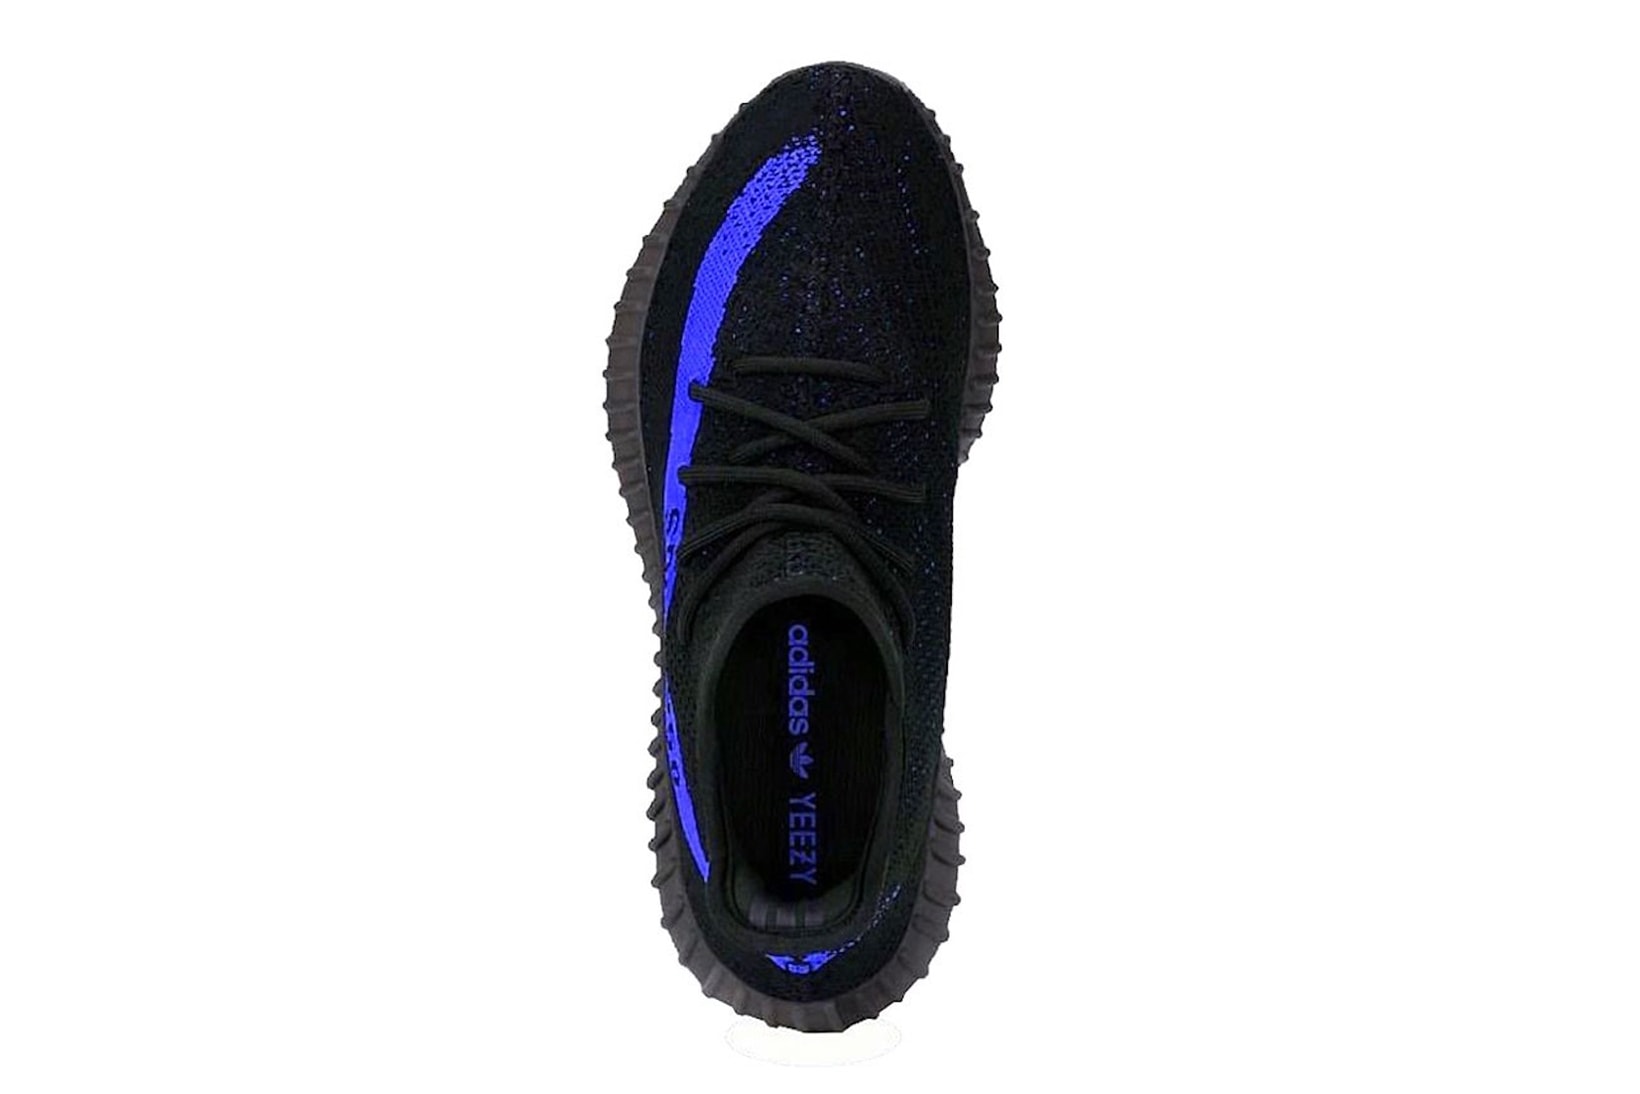 adidas YEEZY BOOST 350 V2 Dazzling Blue Kanye West Sneakers Footwear Shoes Kicks Black Insole Top